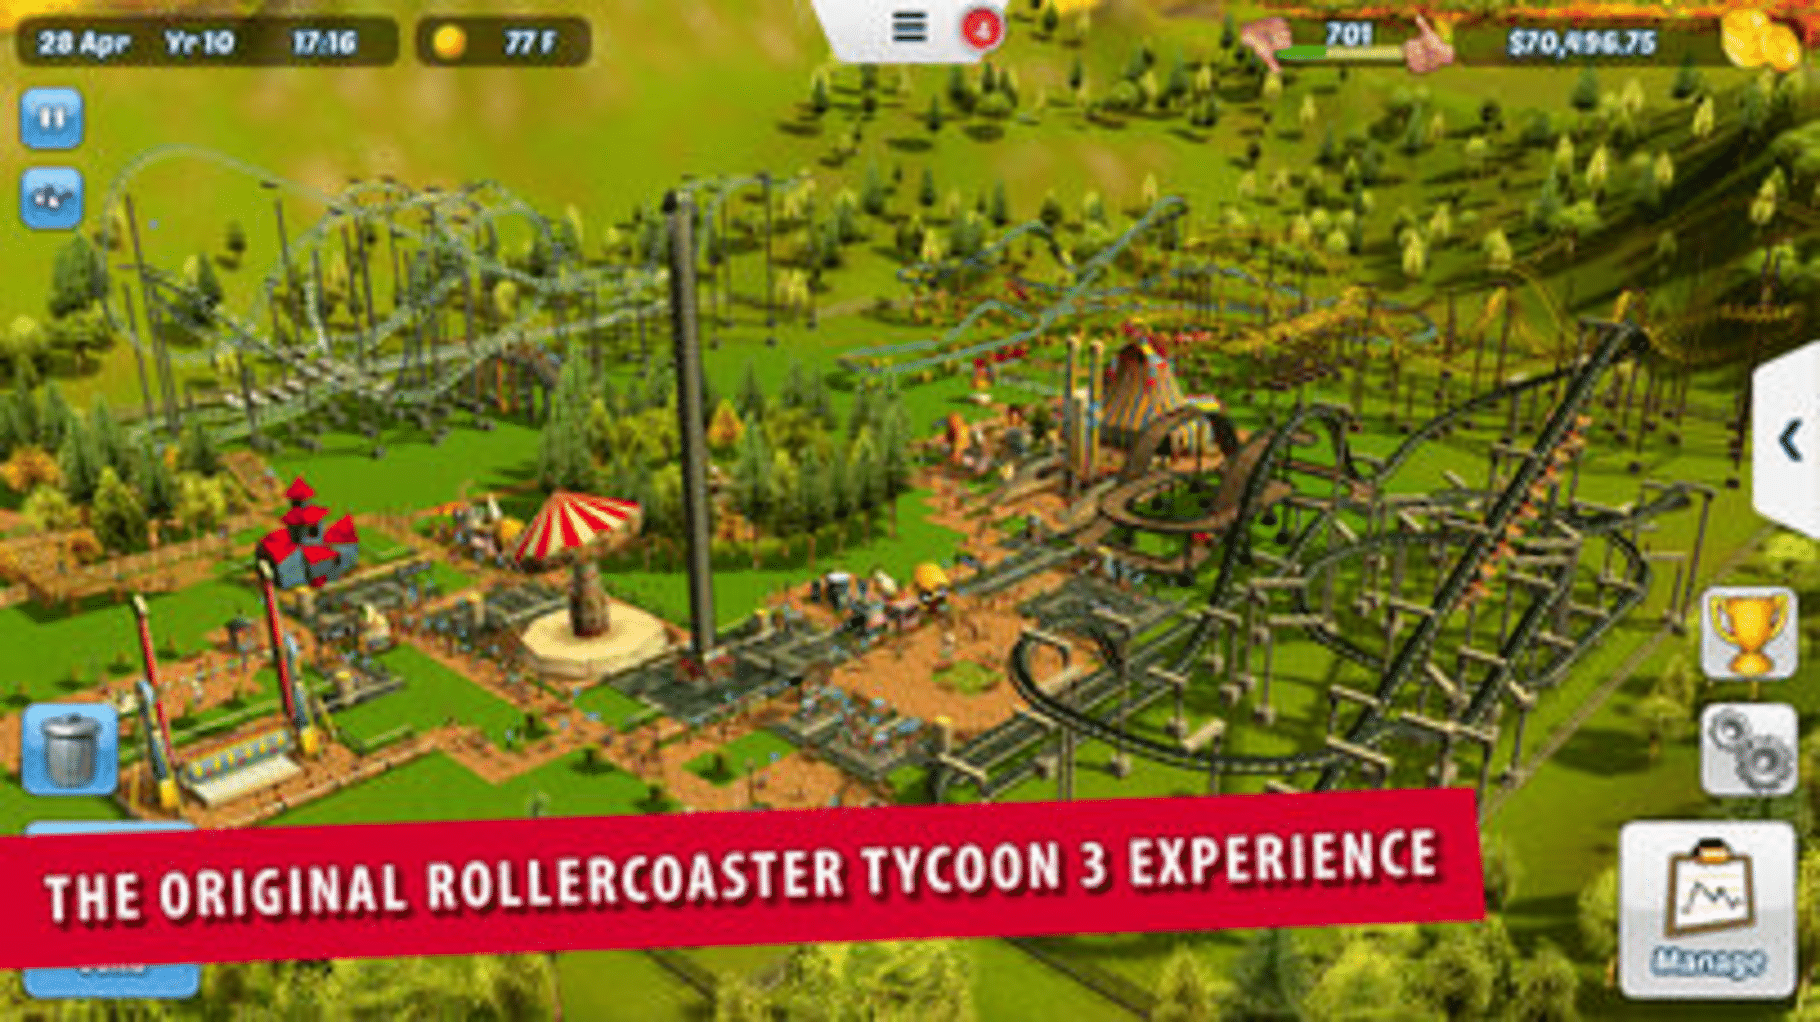 rollercoaster tycoon classic mac torrent